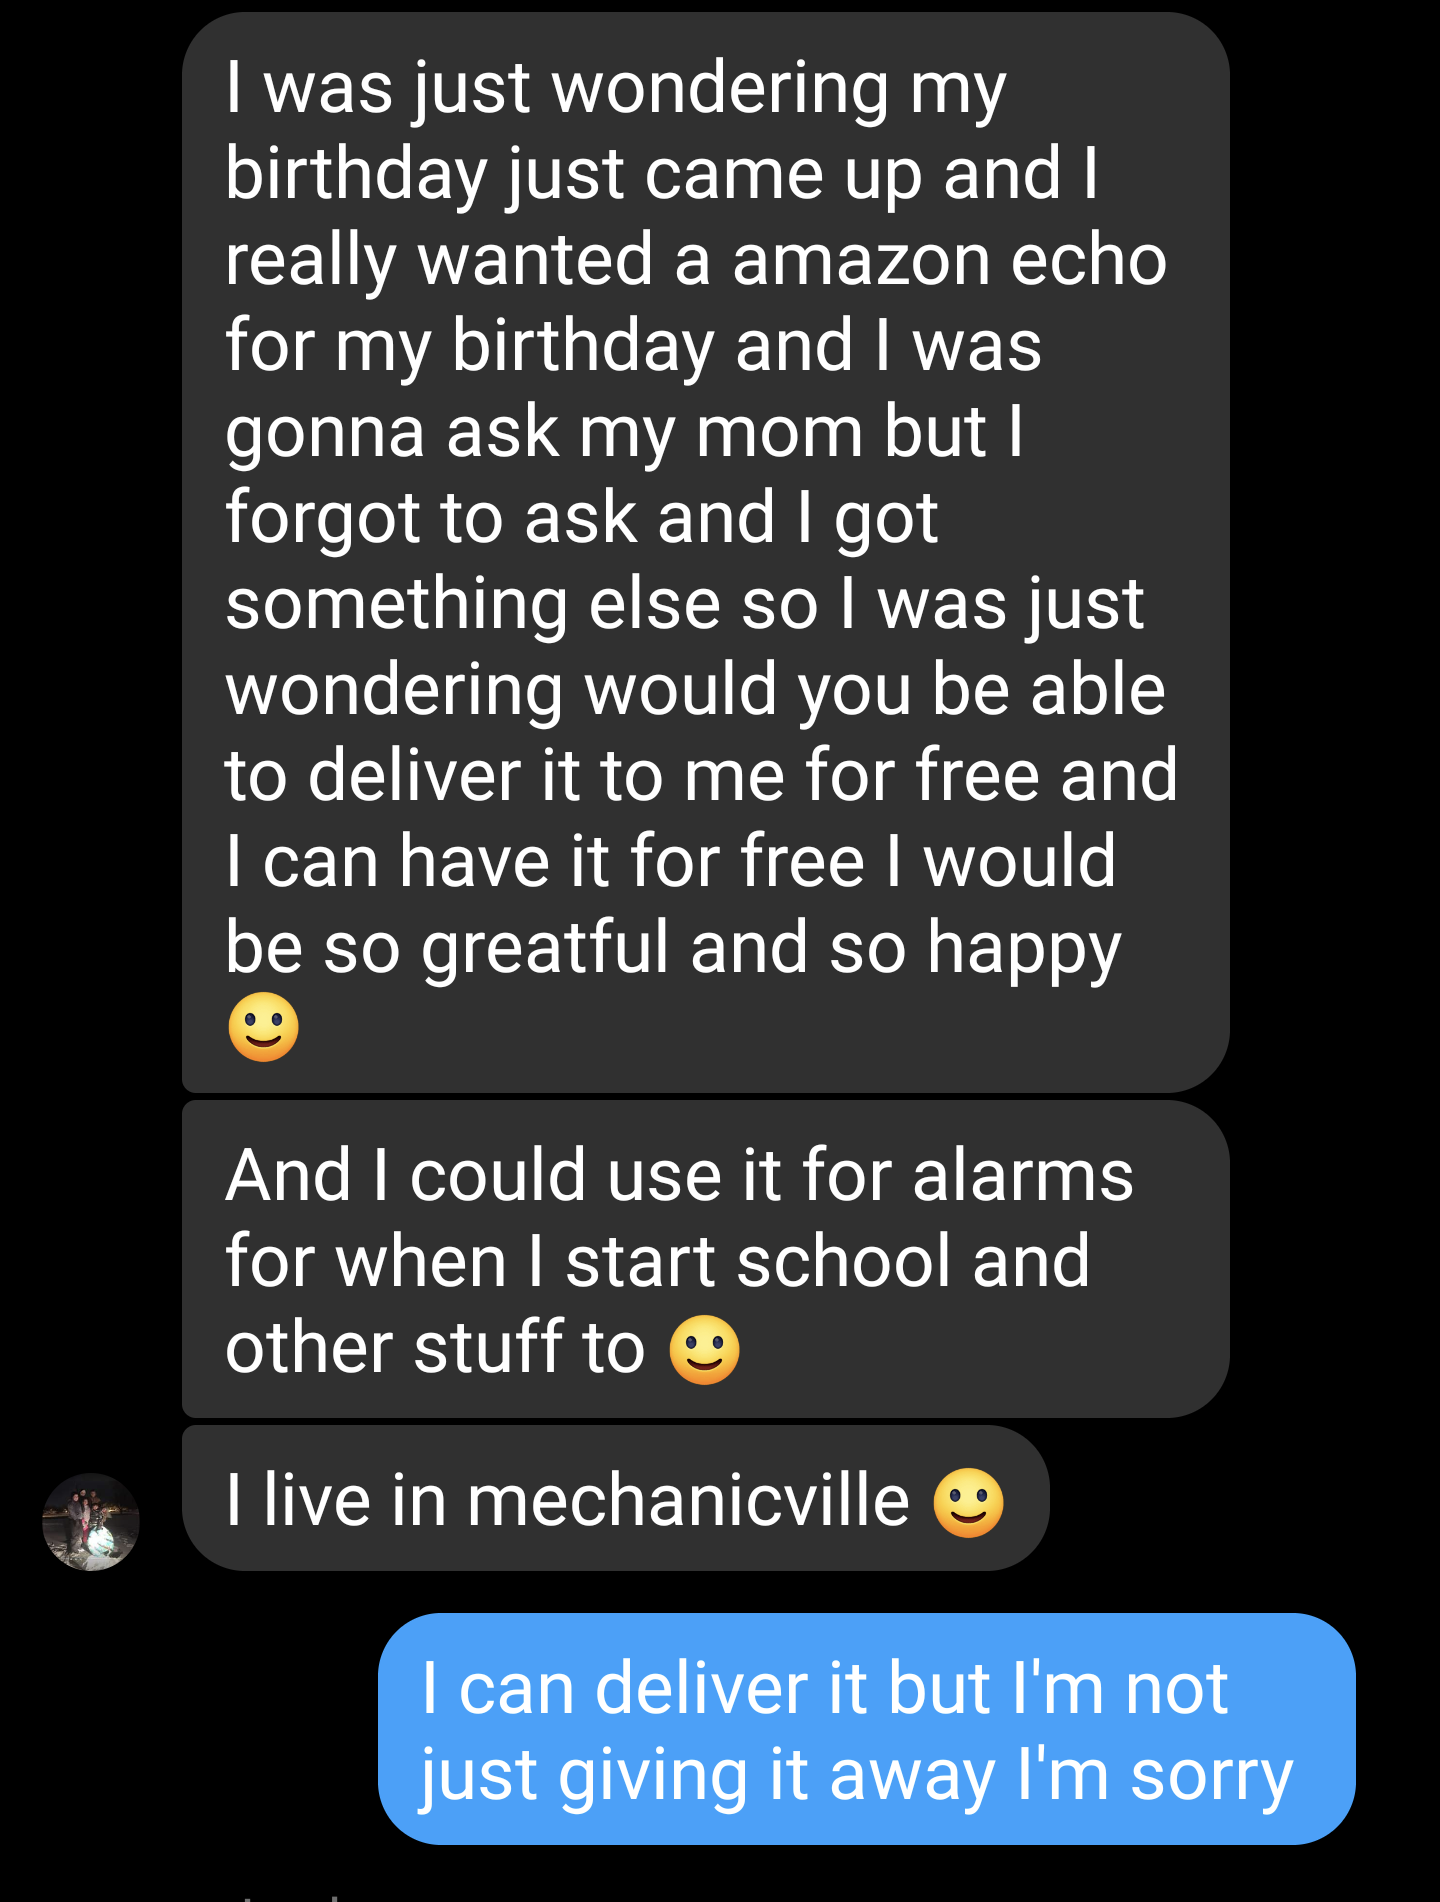 atmosphere quotes - I was just wondering my birthday just came up and I really wanted a amazon echo for my birthday and I was gonna ask my mom but I forgot to ask and I got something else so I was just wondering would you be able to deliver it to me for f